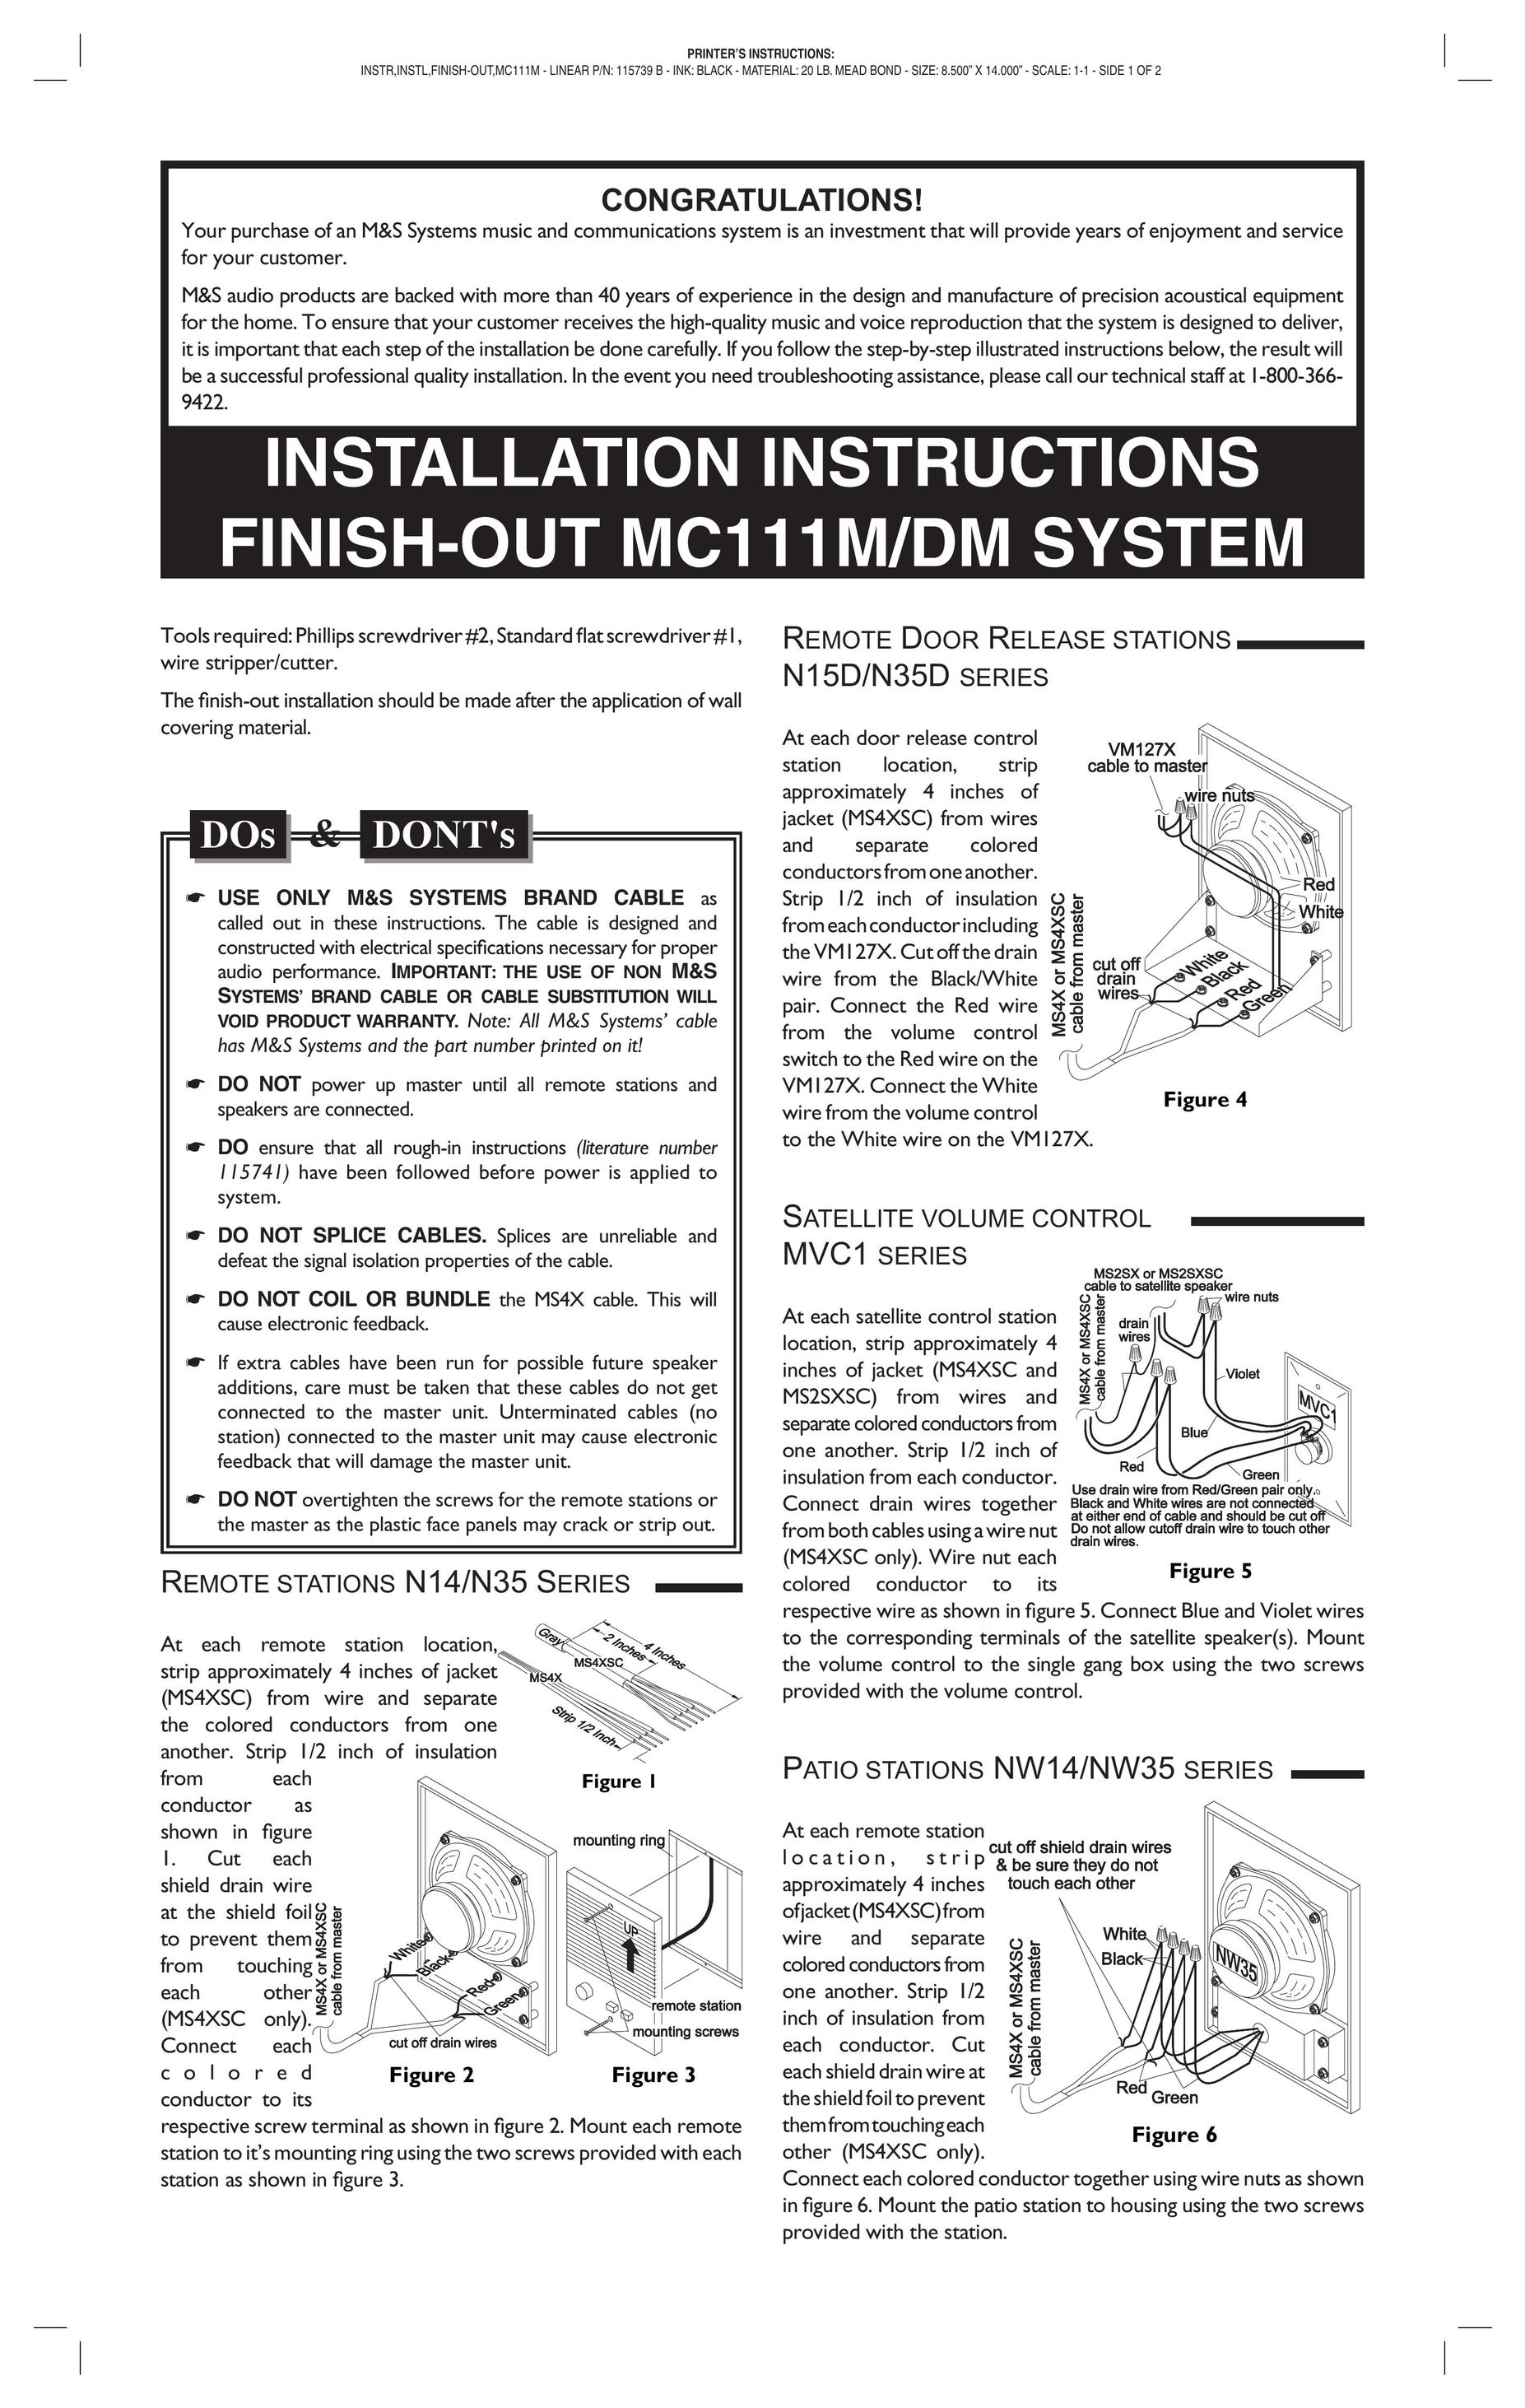 M&S Systems MC111M/DM Stereo System User Manual (Page 1)